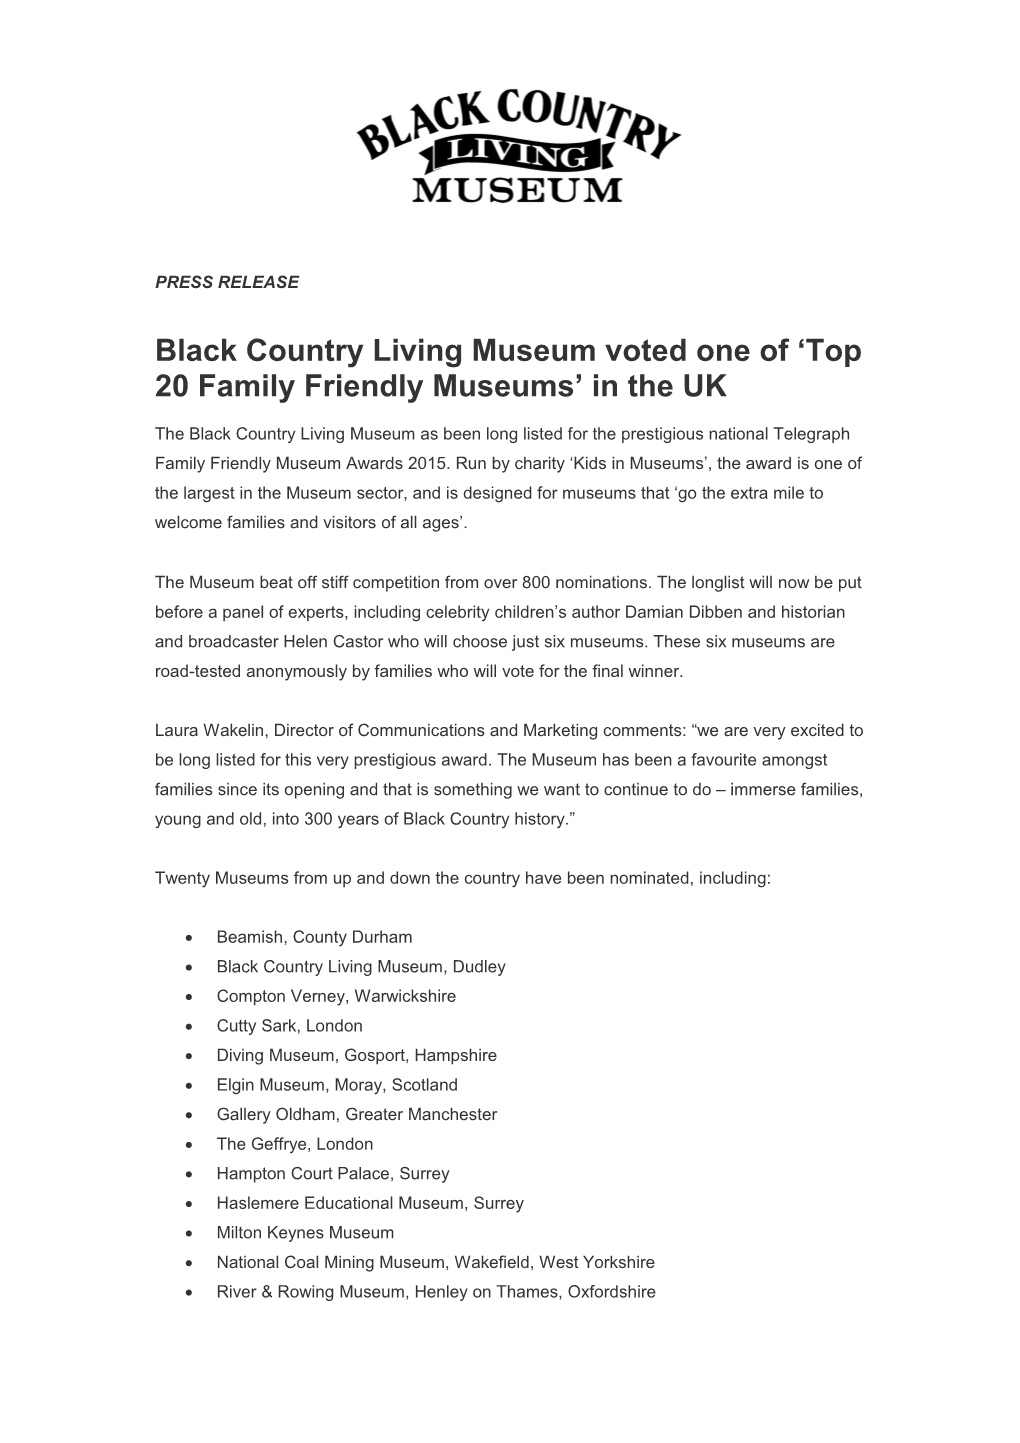 Black Countrylivingmuseum Voted One of Top 20 Family Friendly Museums in the UK